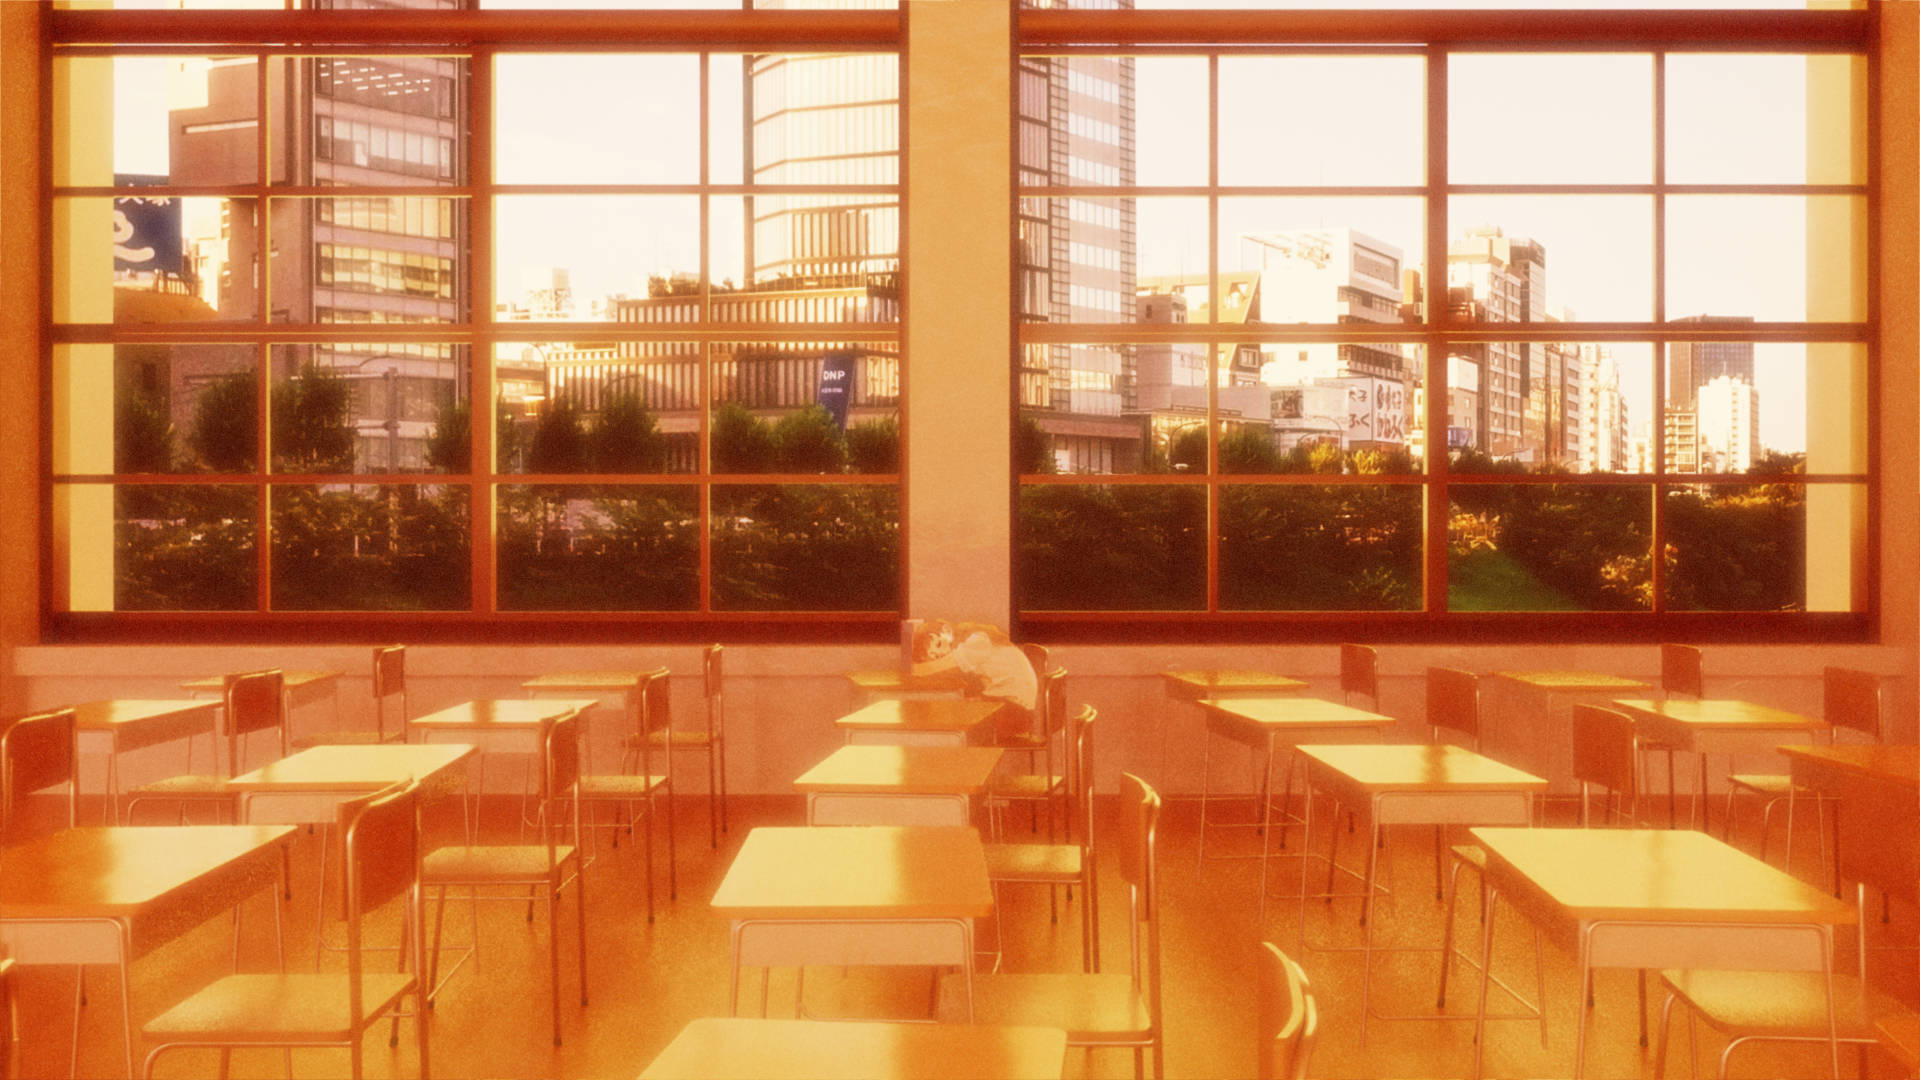 Orangeanime Classroom Would Be Translated To Swedish As 